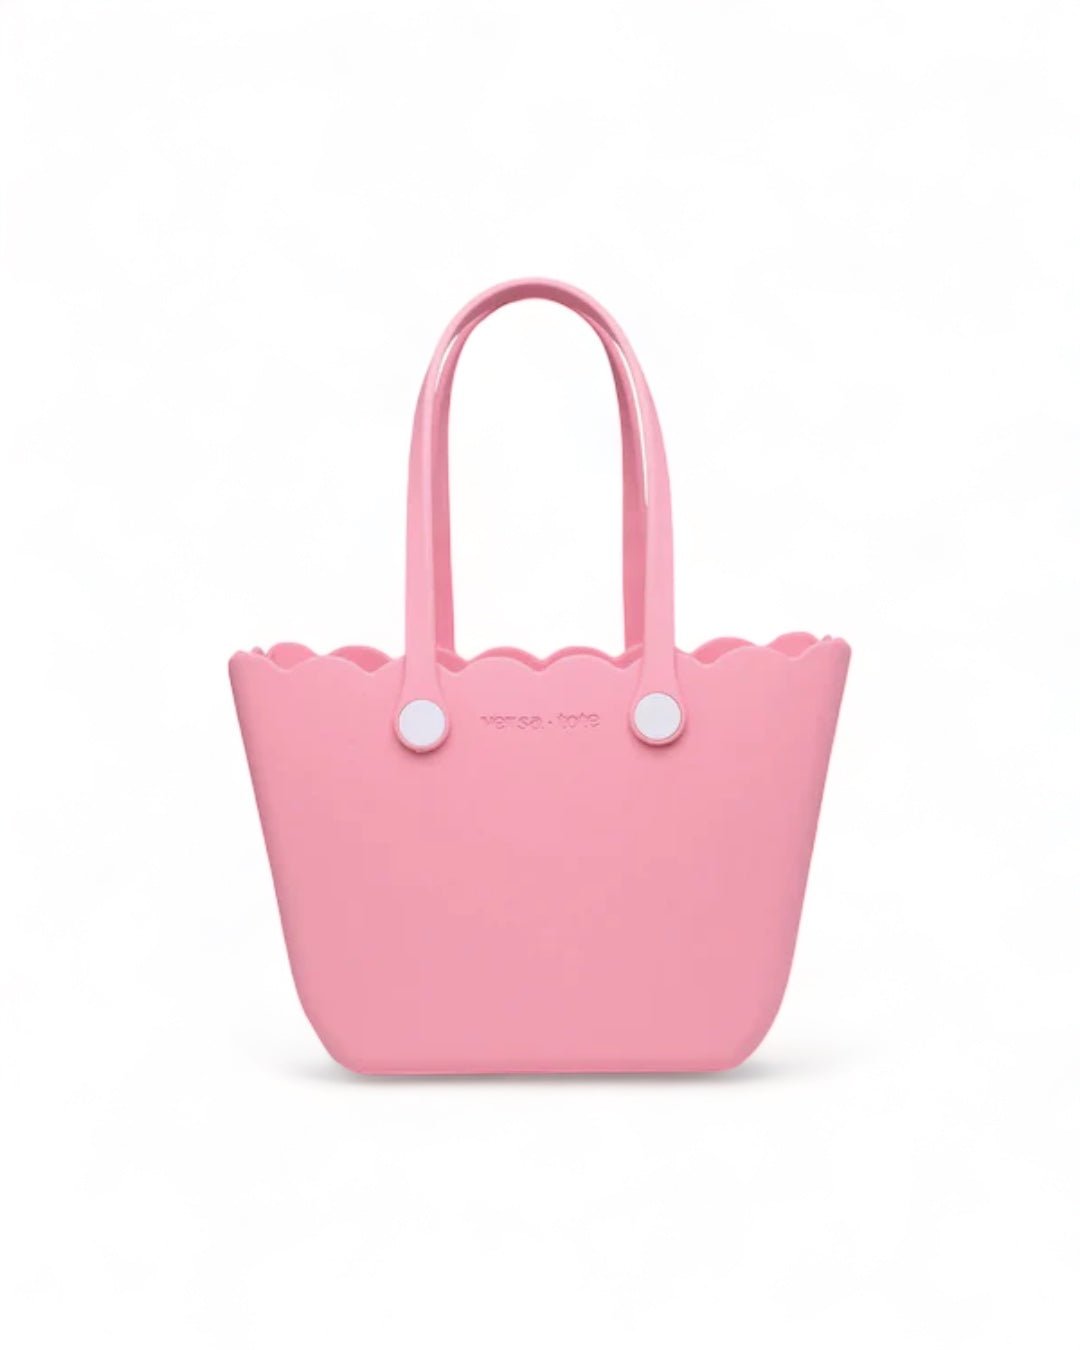 Rose Scalloped Versa Tote - Frock Shop